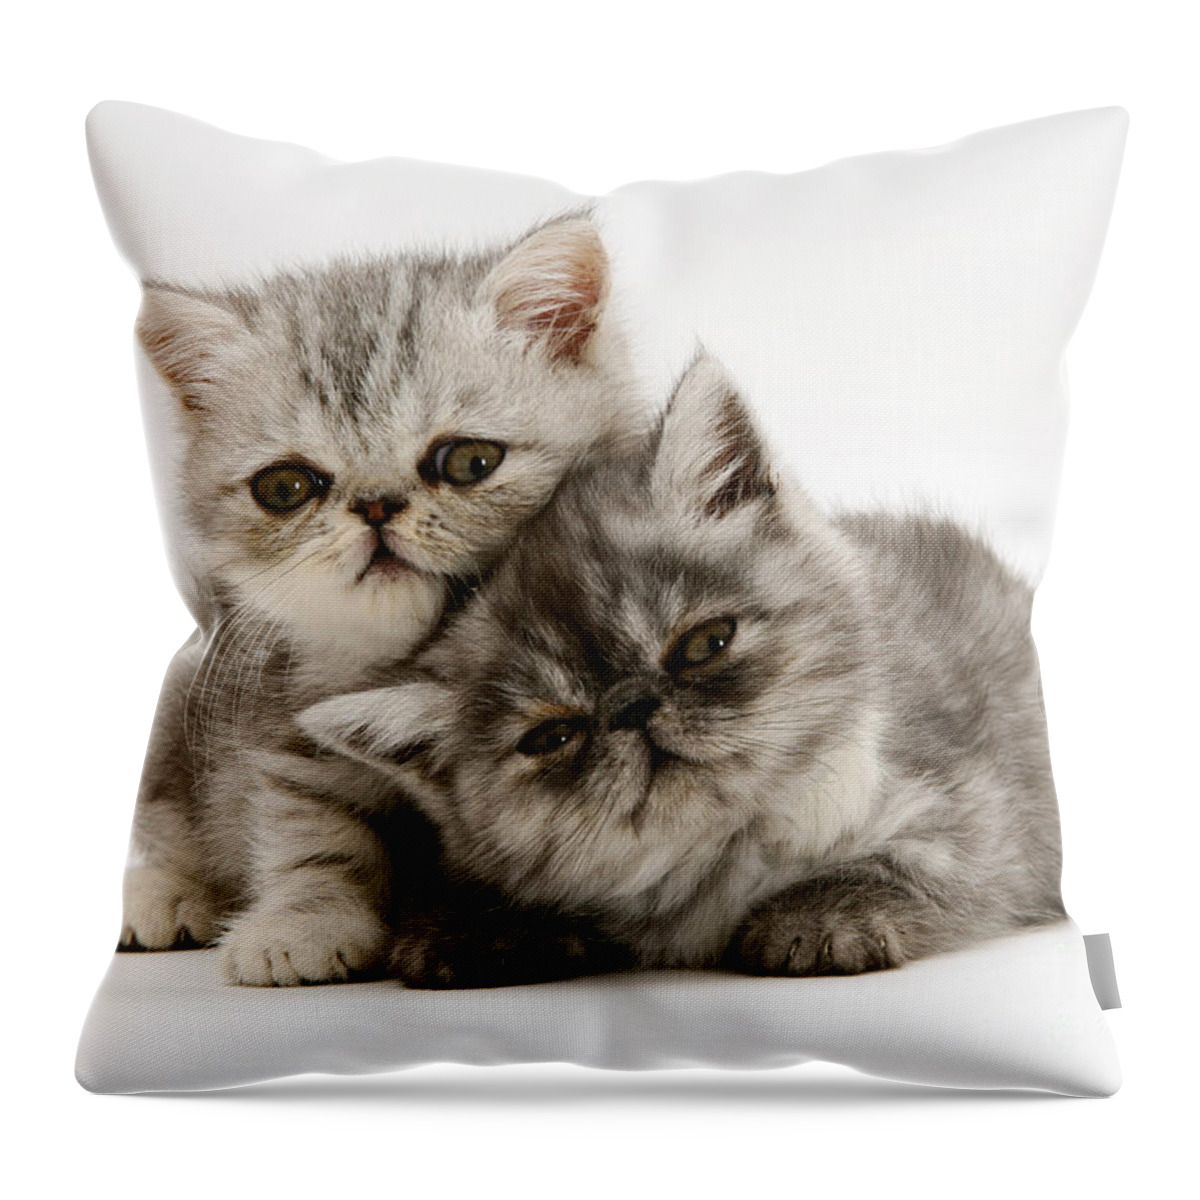 Kitten Throw Pillow featuring the photograph Smoke And Silver Exotic Shorthair Kitten by Jane Burton